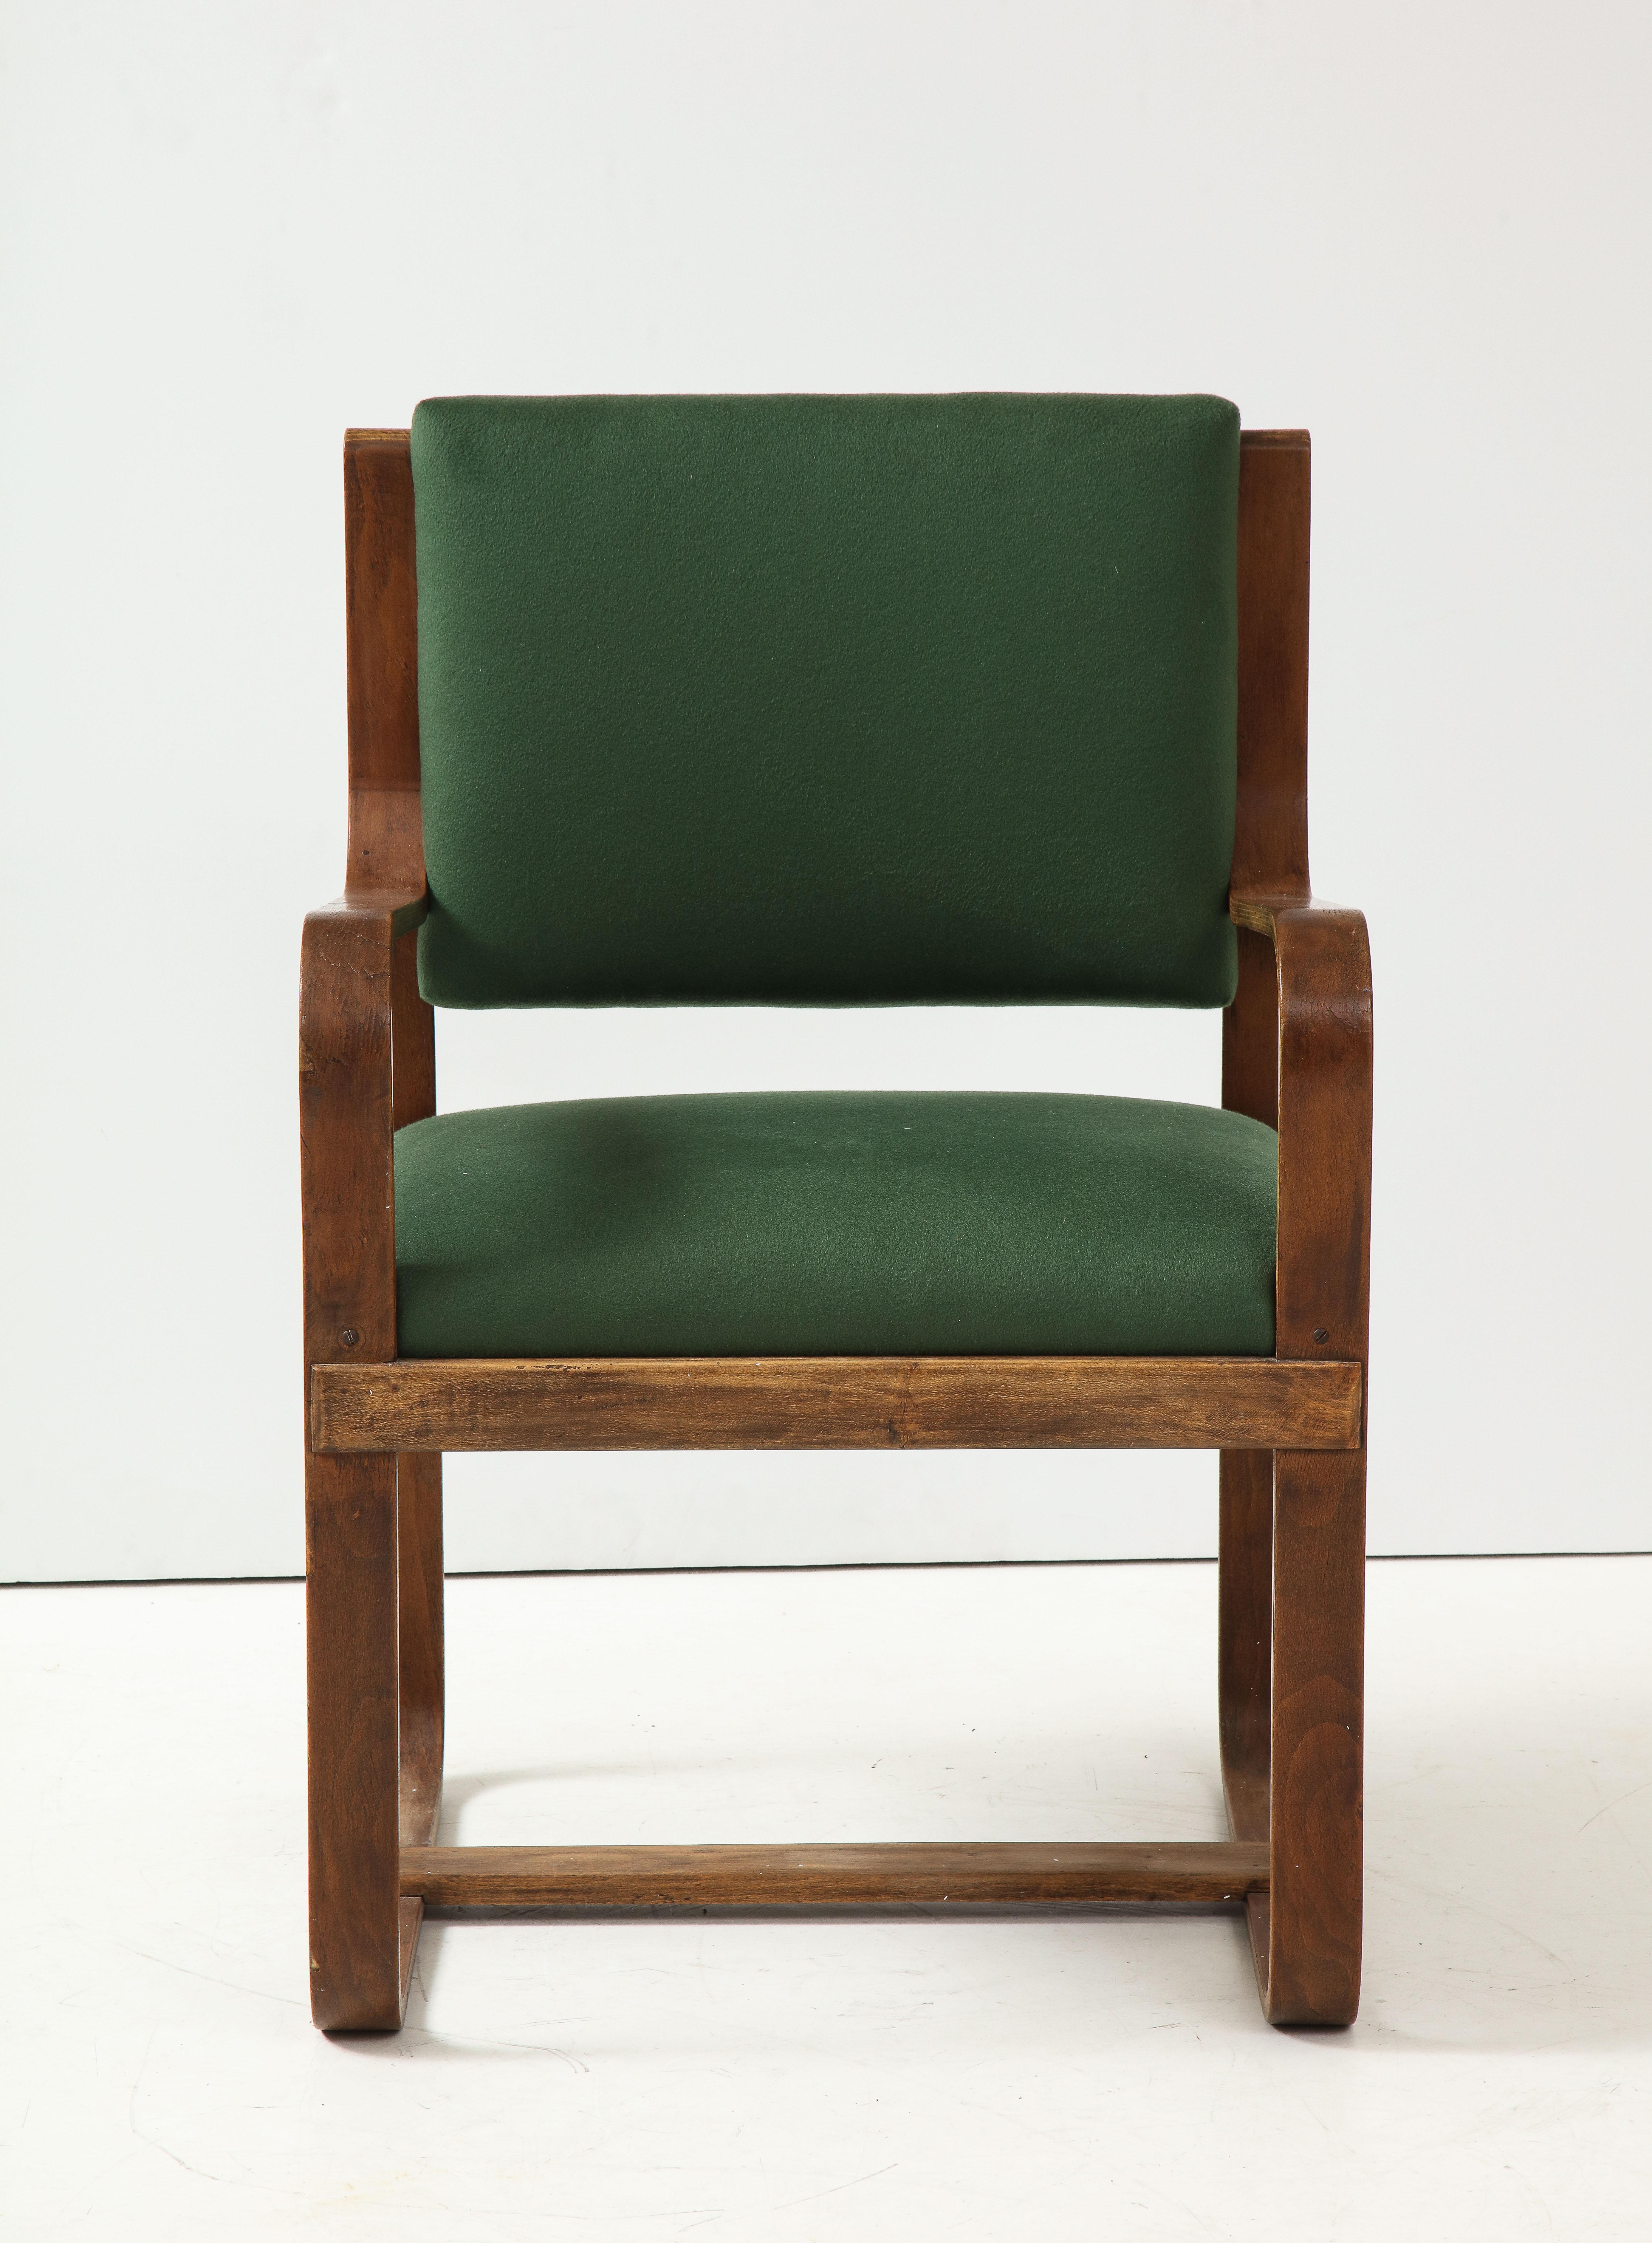 Curved Laminated Wood Armchair by Giuseppe Pagano, Italy, c. 1940s. 

This stunning armchair was originally designed for the Bocconi University of Milano by architect, furniture designer, and longtime editor of Casabella, Giuseppe Pagano. The chair